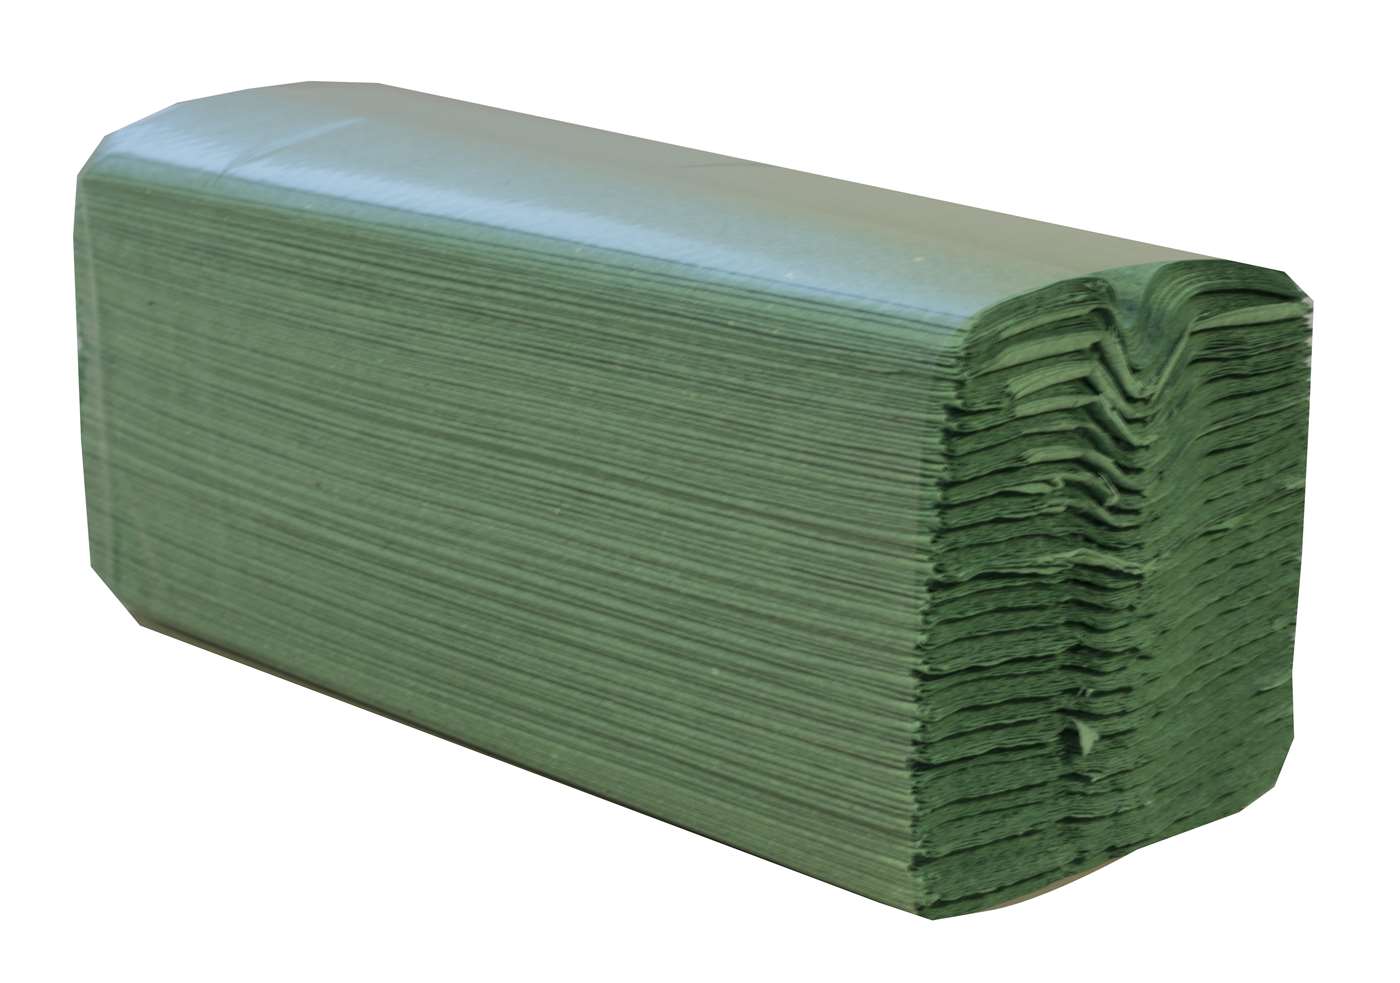 PRO C-fold 1 ply Green recycled paper towels. Great value, standard paper hand towels. Each towel is